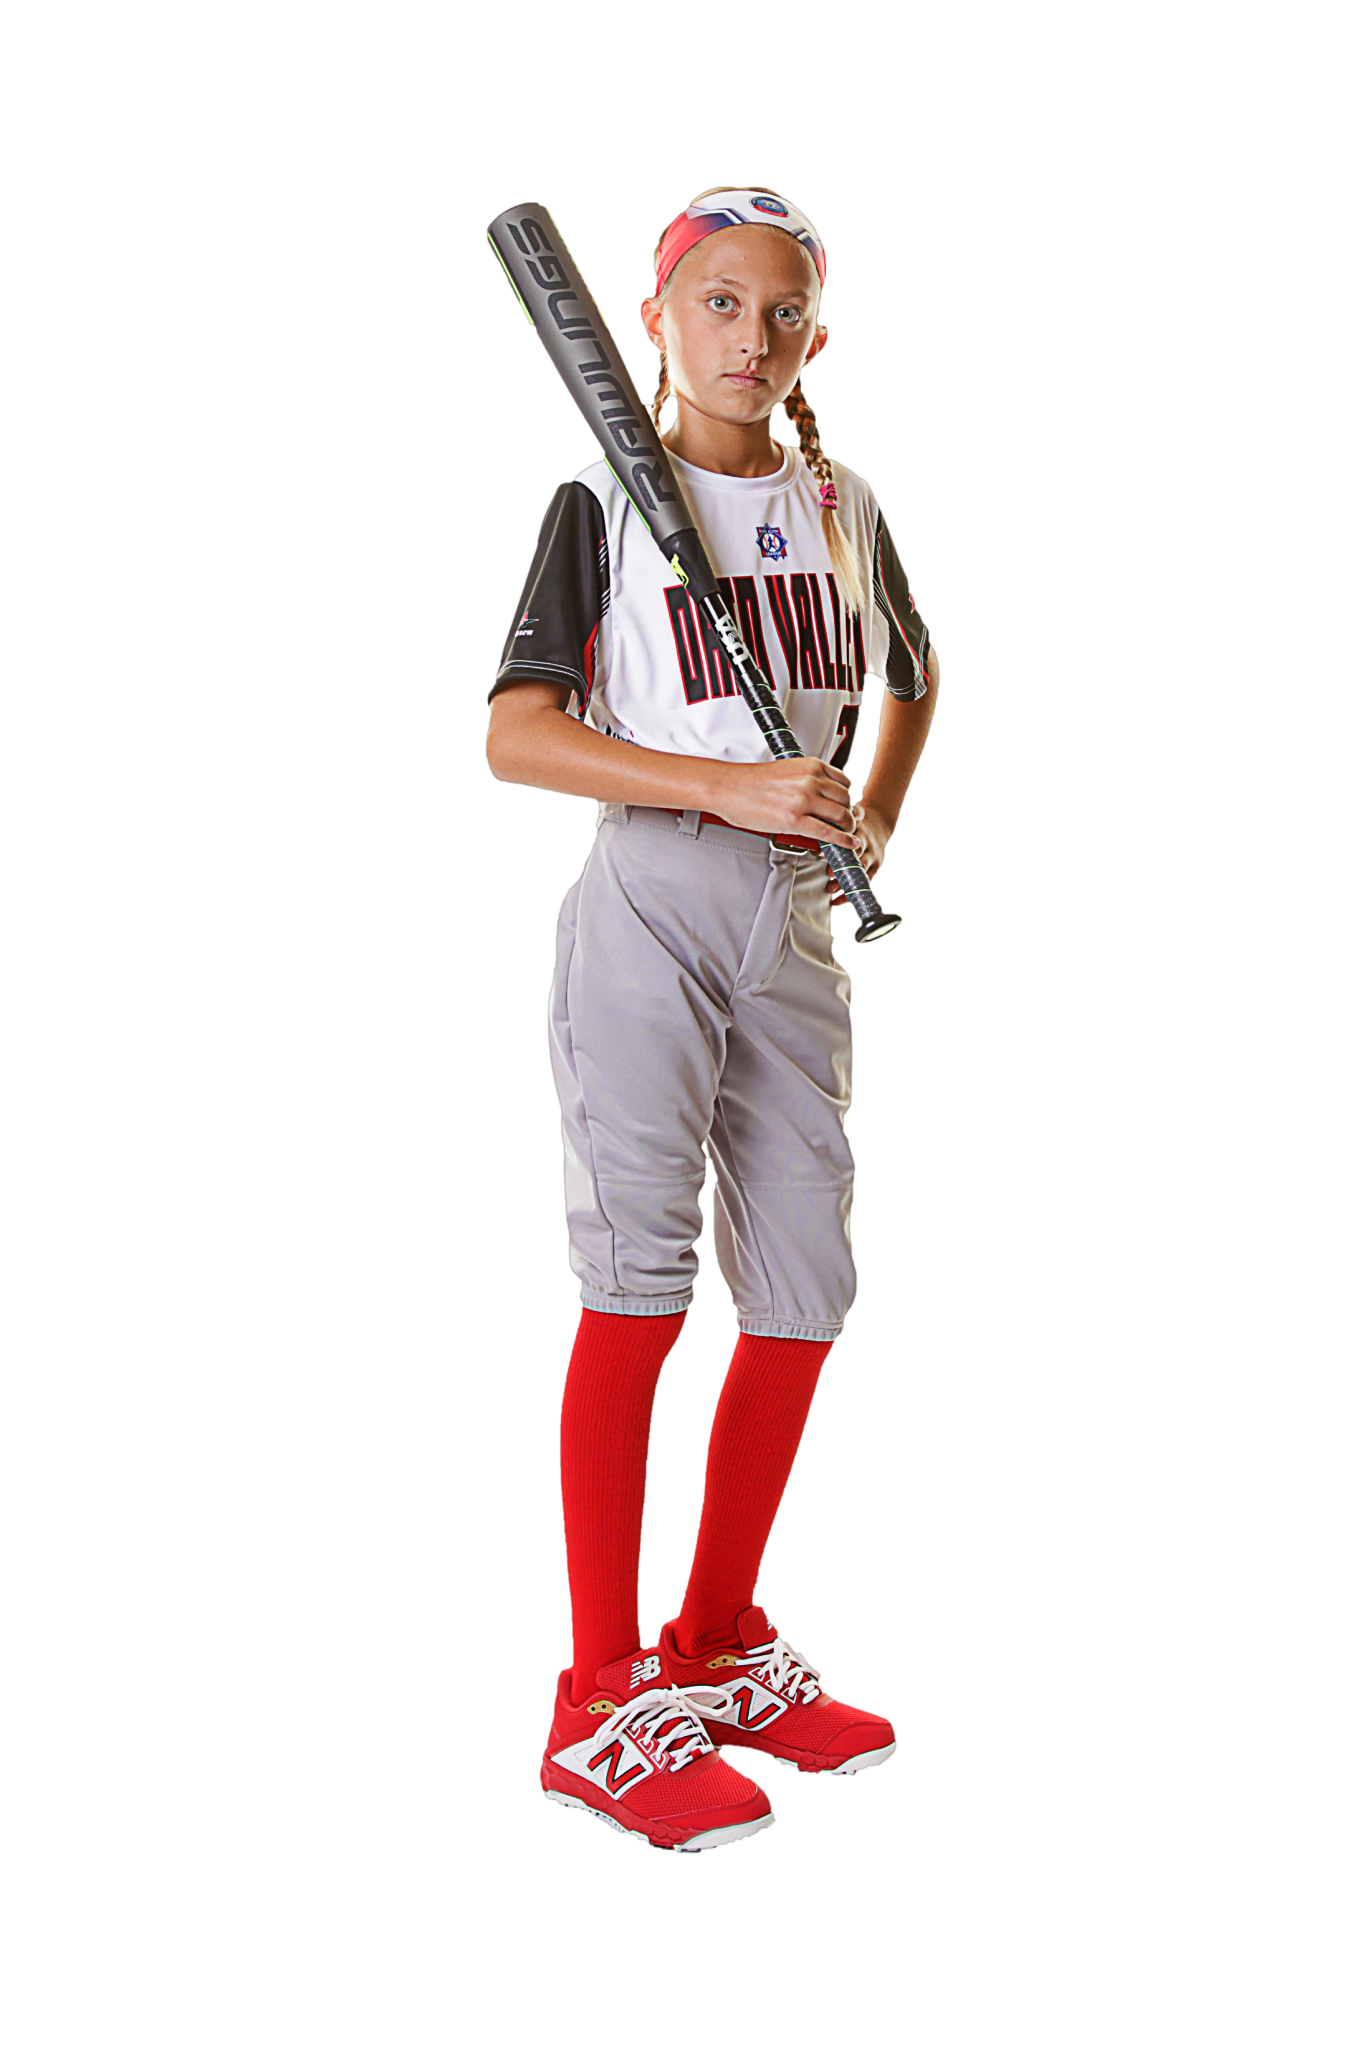 Alleson Athletic Named Official Uniform of Babe Ruth League